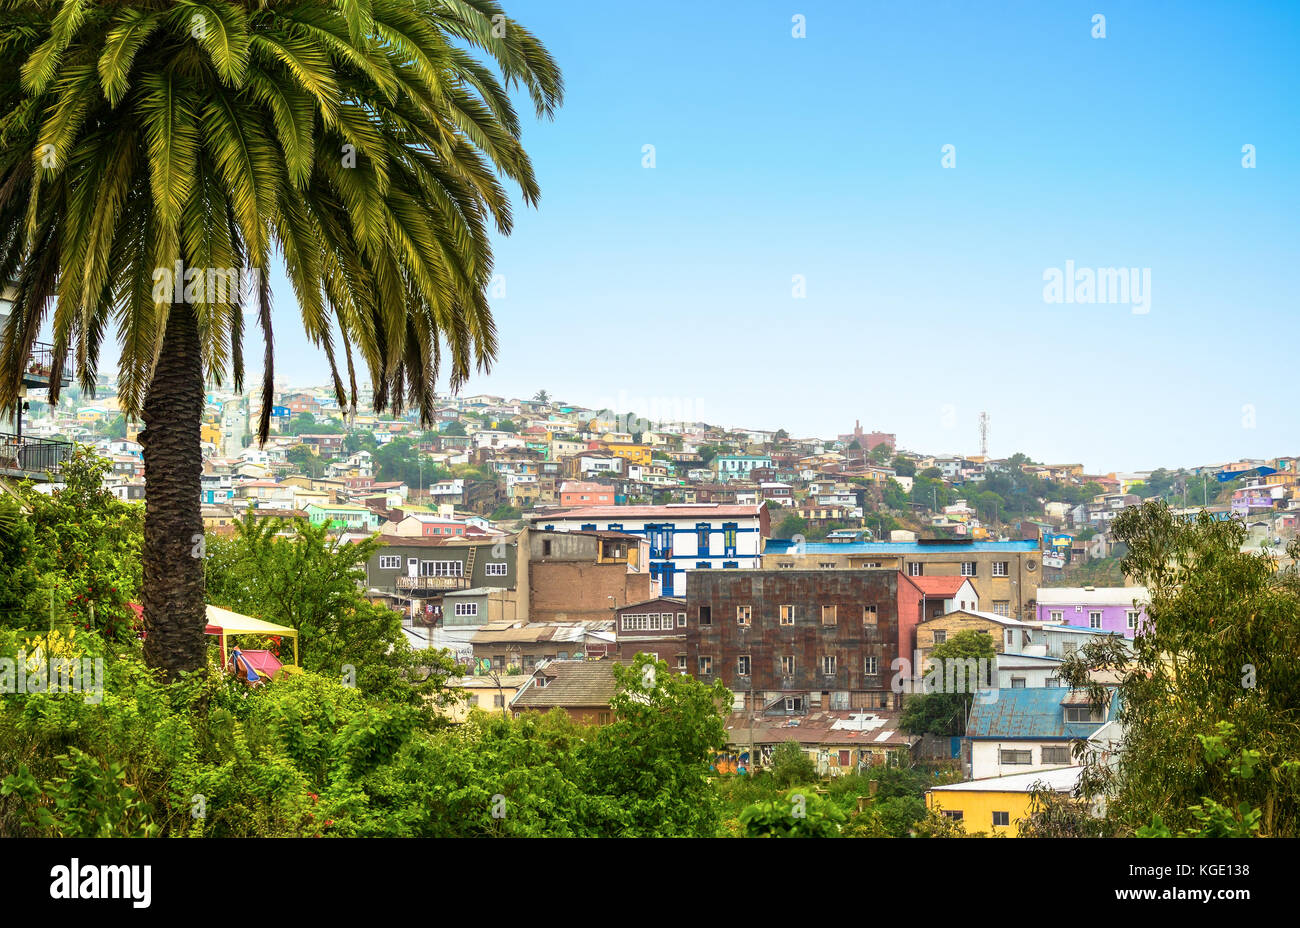 VALPARAISO, CHILE - OCTOBER 27, 2016: View of city center of Valparaiso form hill. Valparaiso is very picturesque city and famous as a UNESCO World He Stock Photo